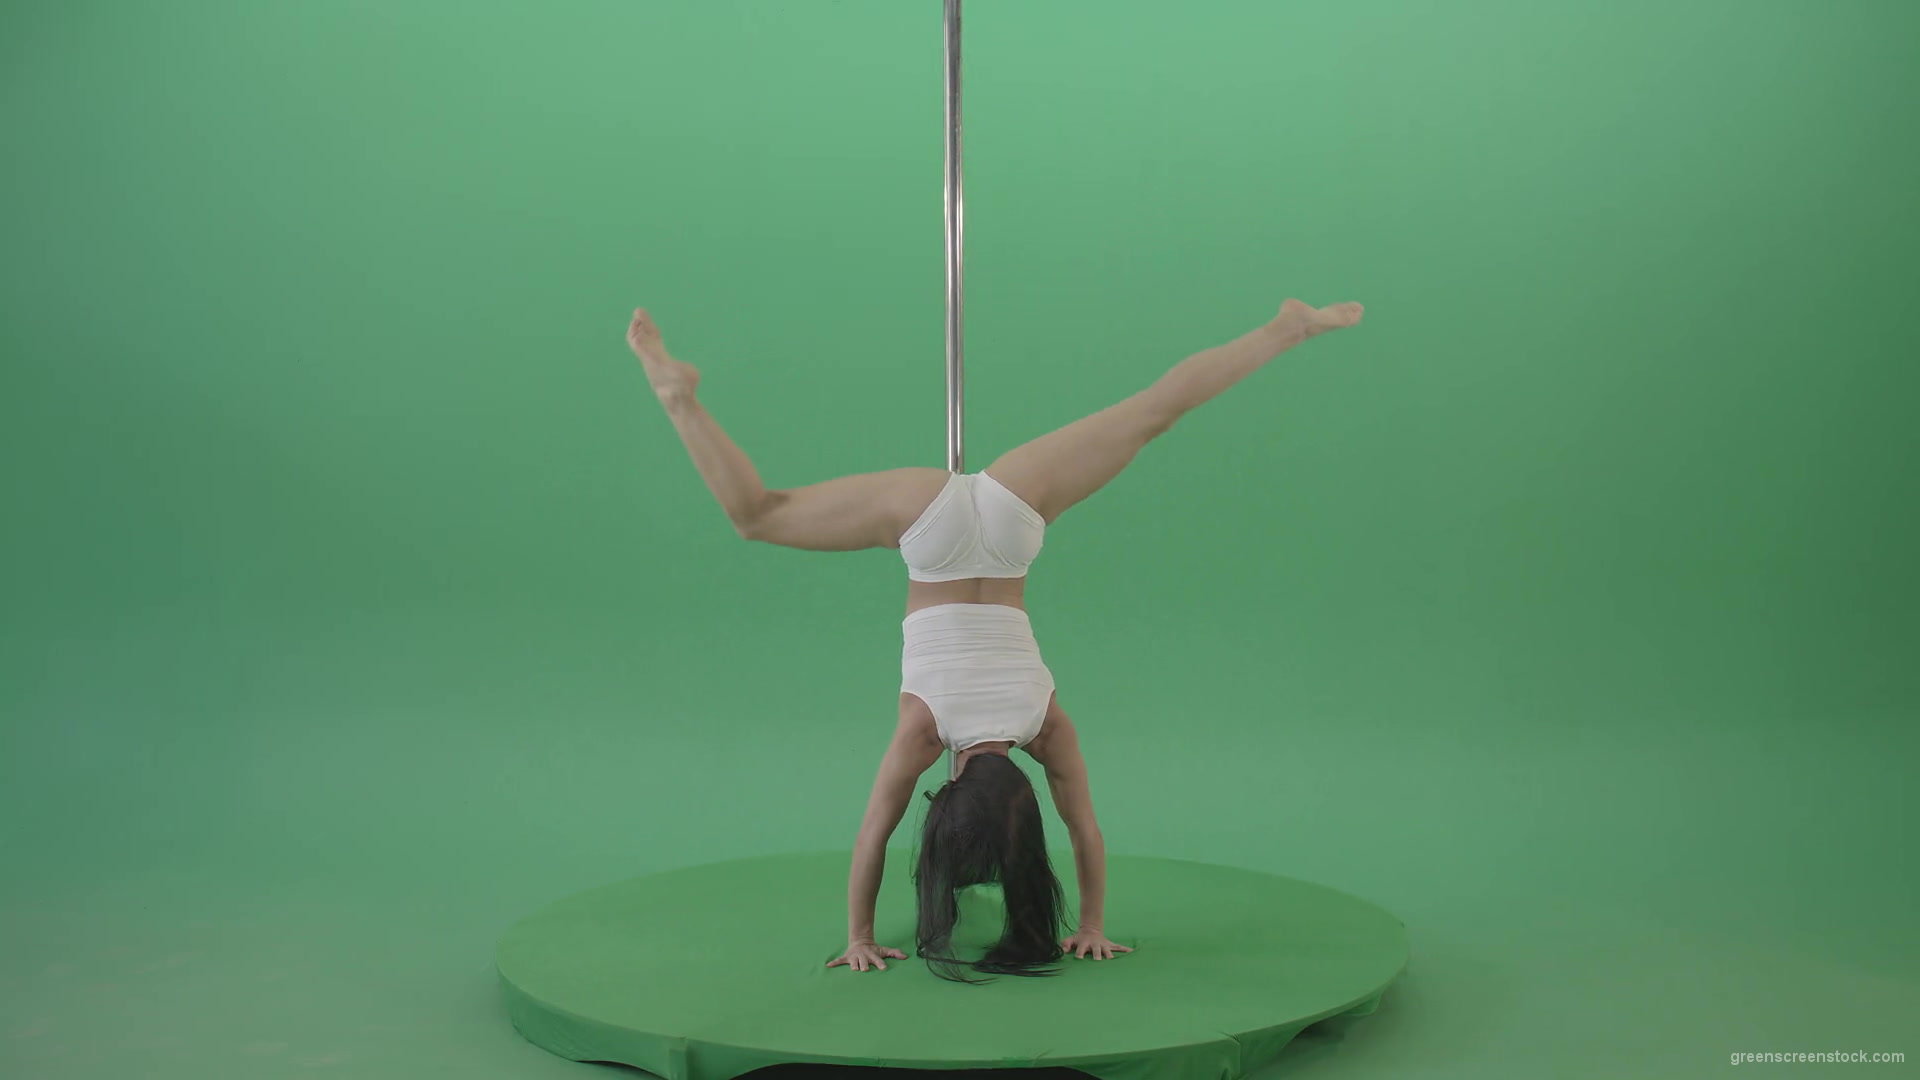 Pole-Dance-Girl-waving-two-legs-isolated-on-green-screen-4K-Video-Footage-1920_007 Green Screen Stock